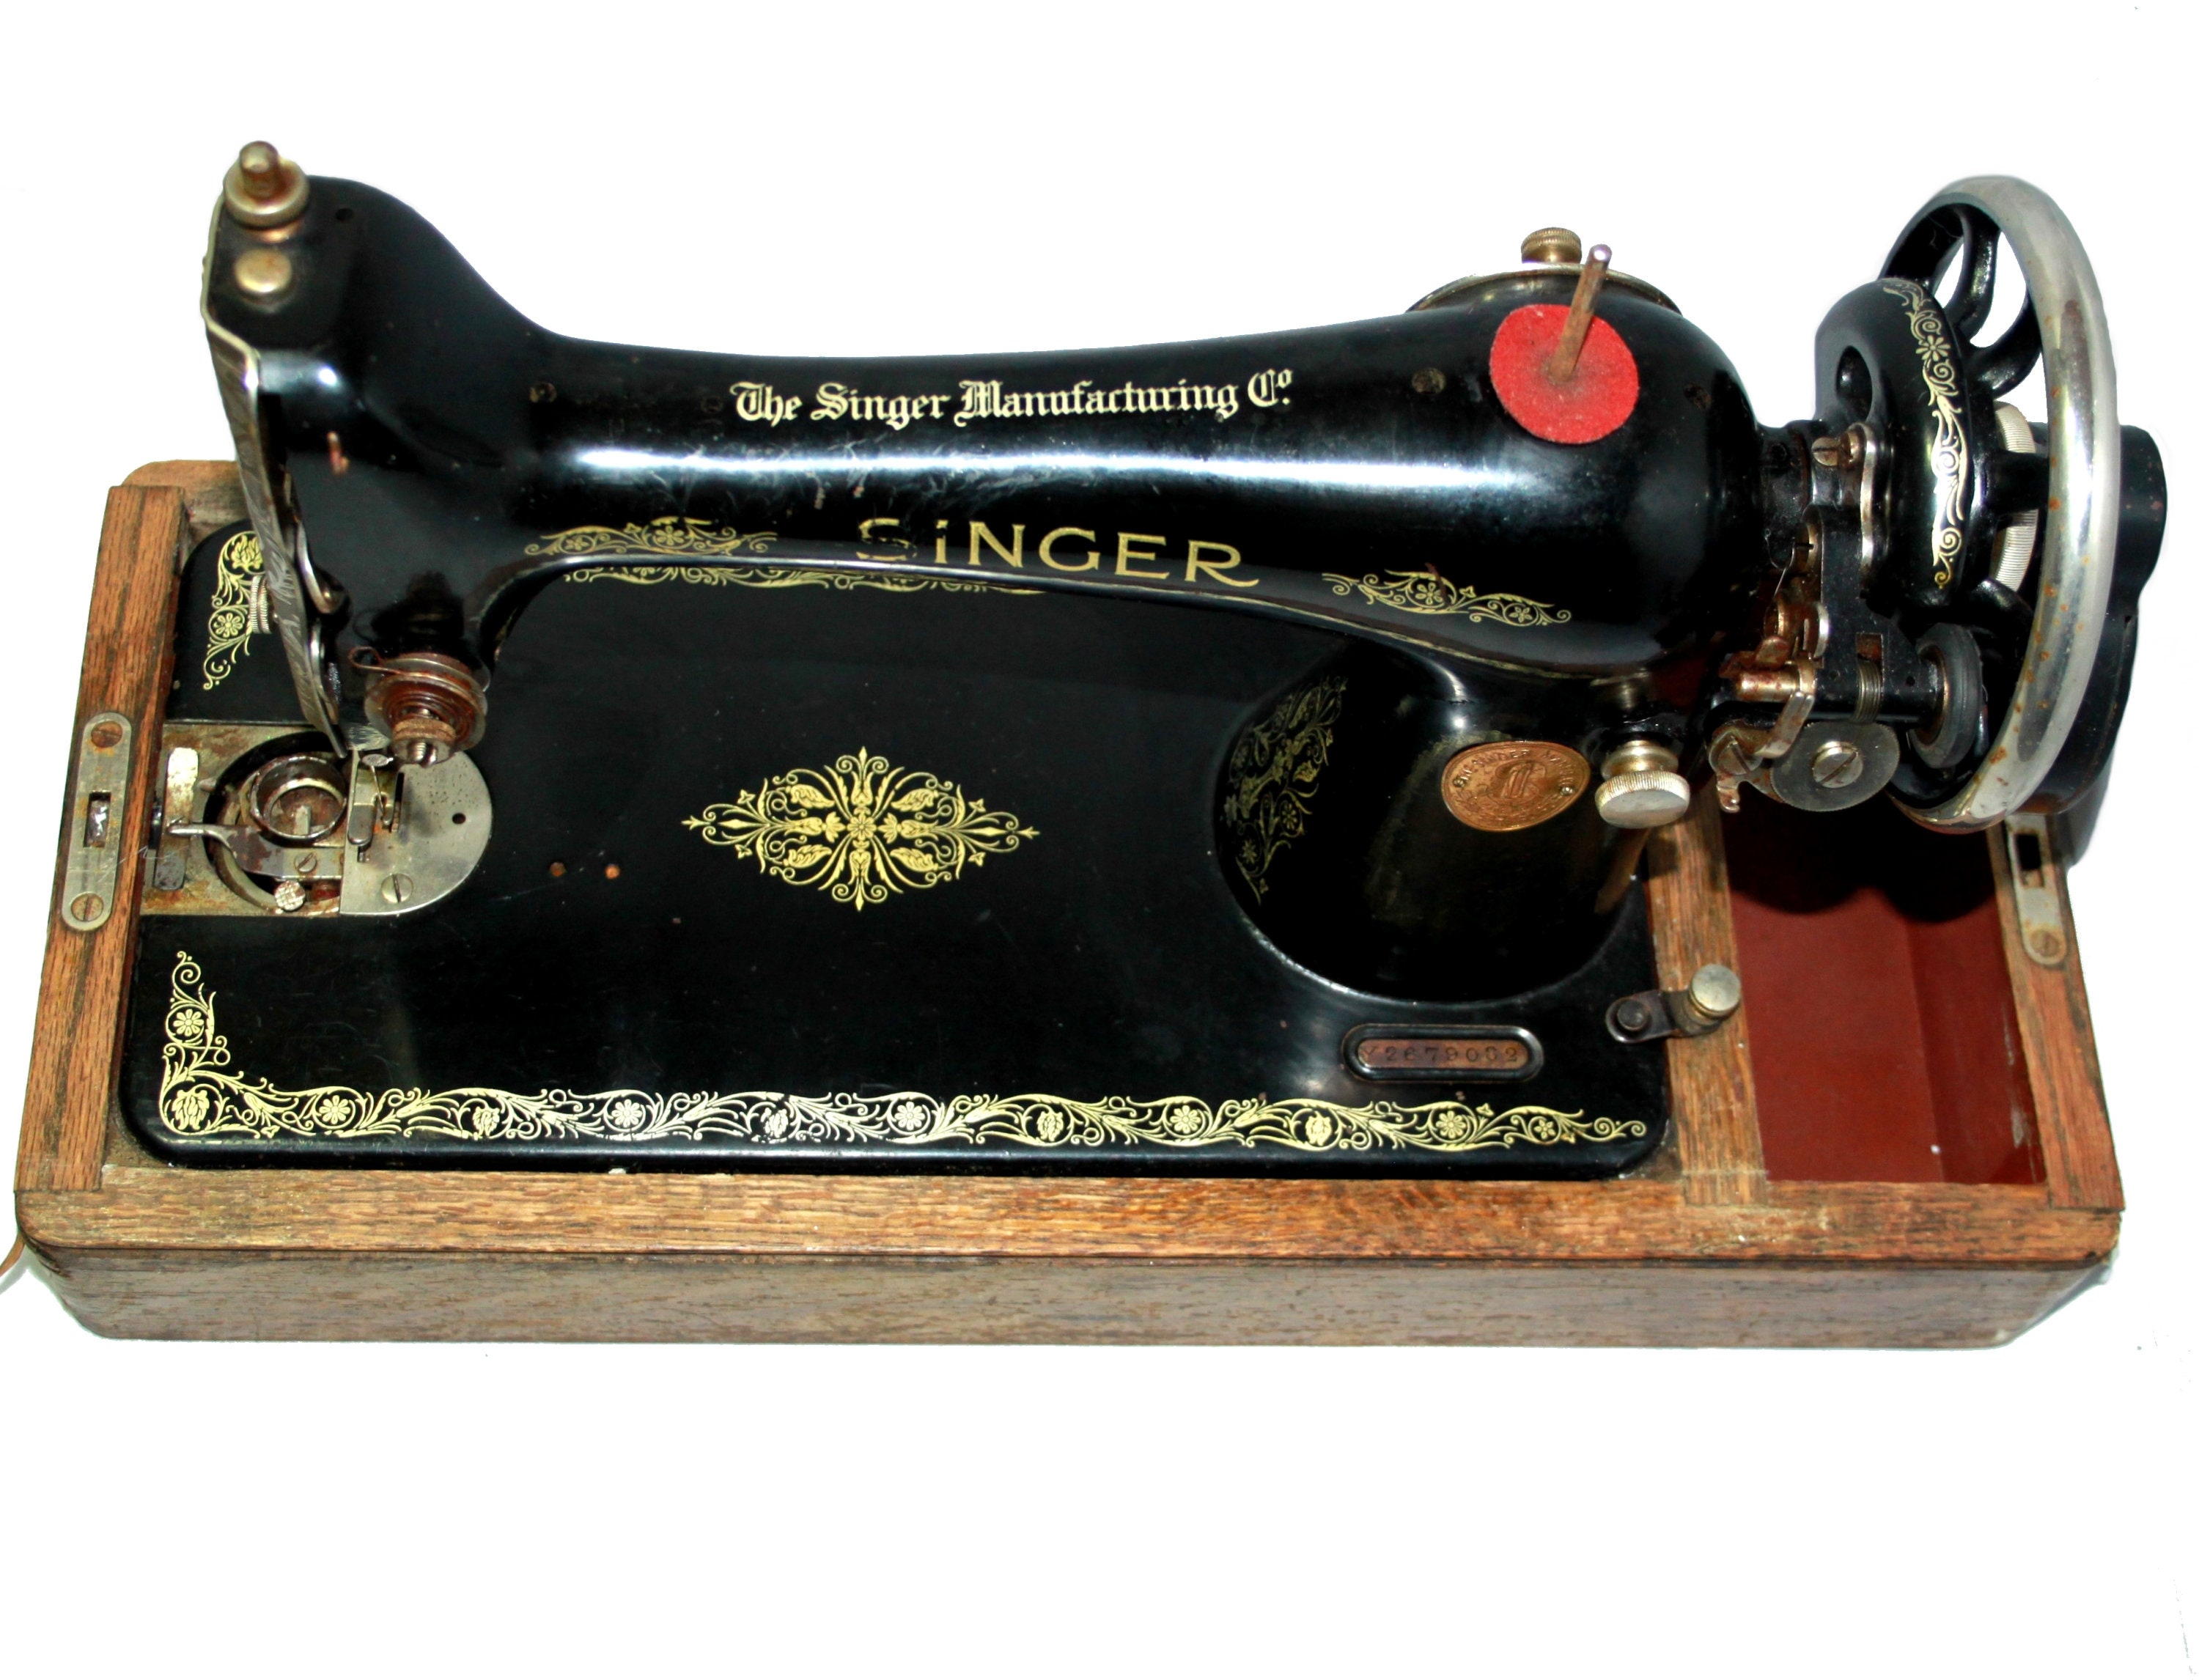 Is your grandmother's sewing machine dangerous? 1948 Singer Sewing Machine  in Table: 6,238 ppm Lead (in the gold paint).